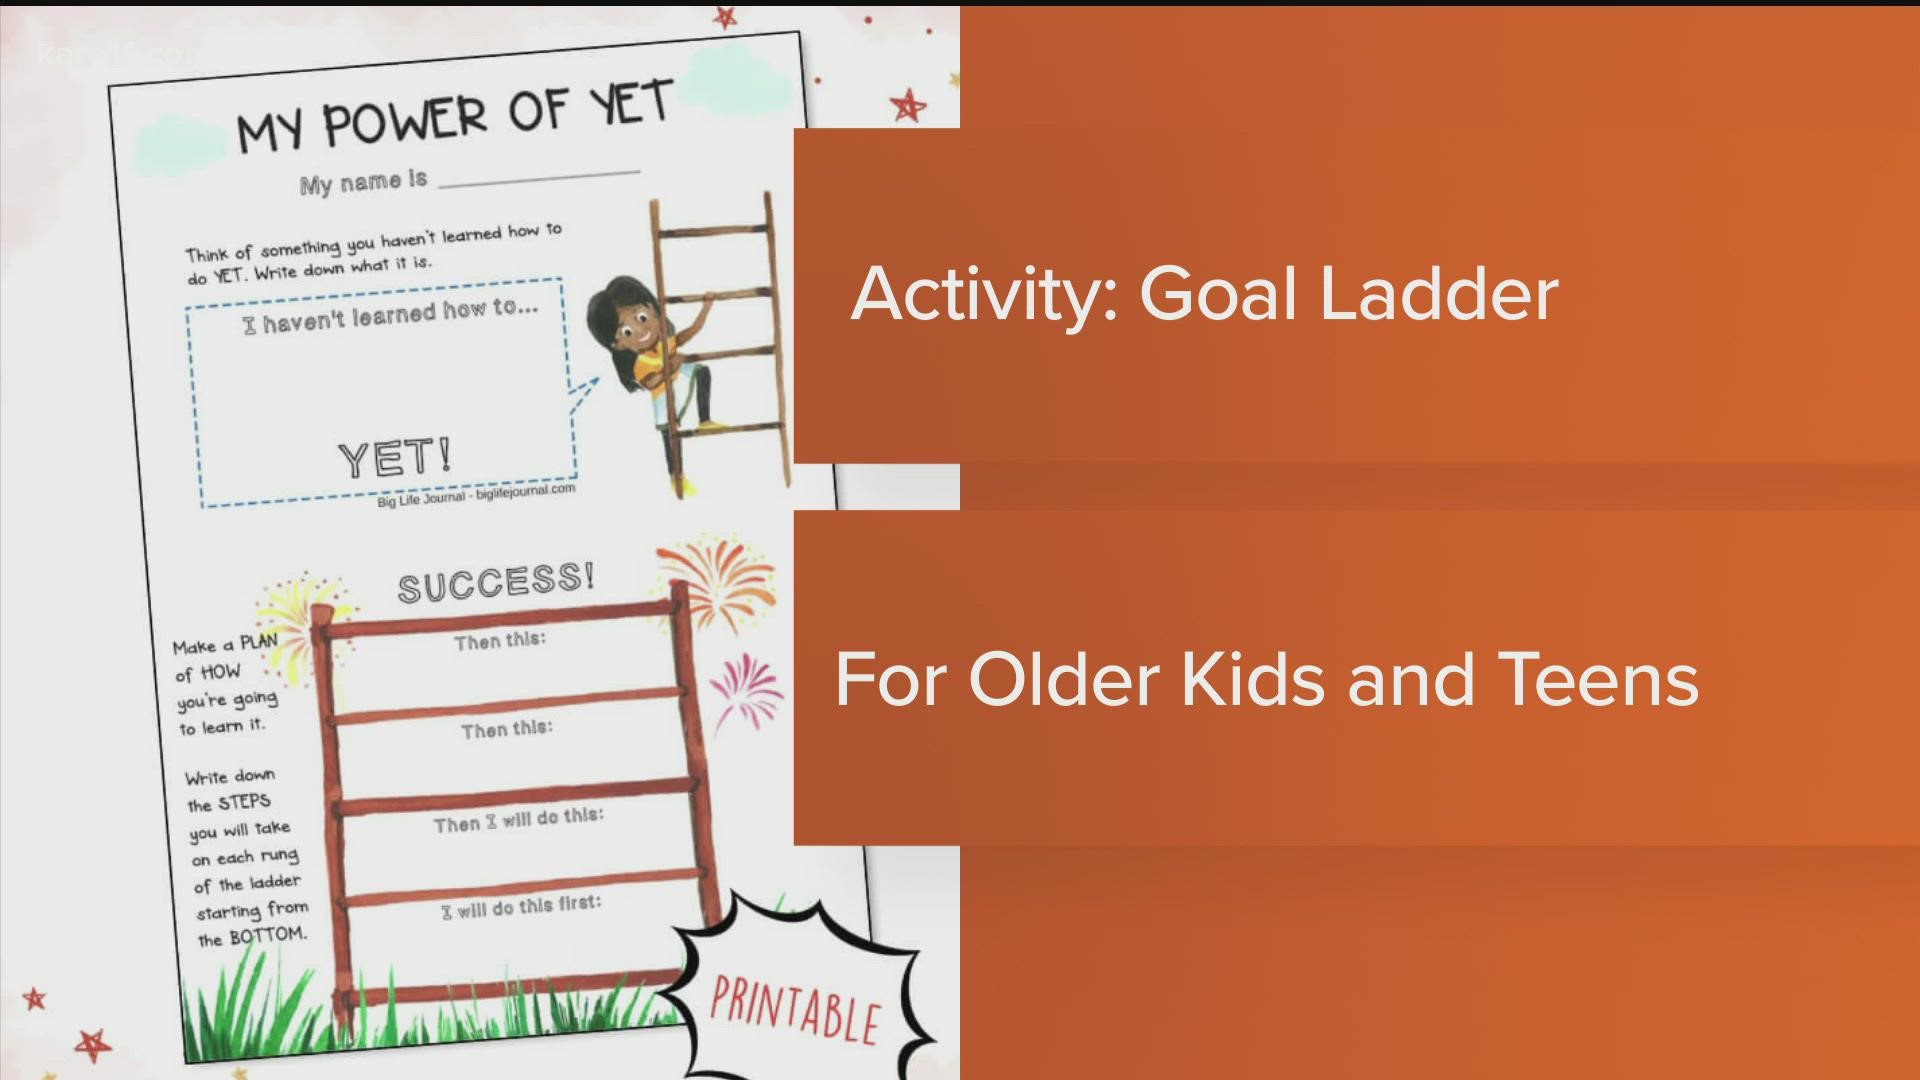 Laura Davis, with College Nannies and Sitters, explains what types of goals children can set and how it benefits them in the future.